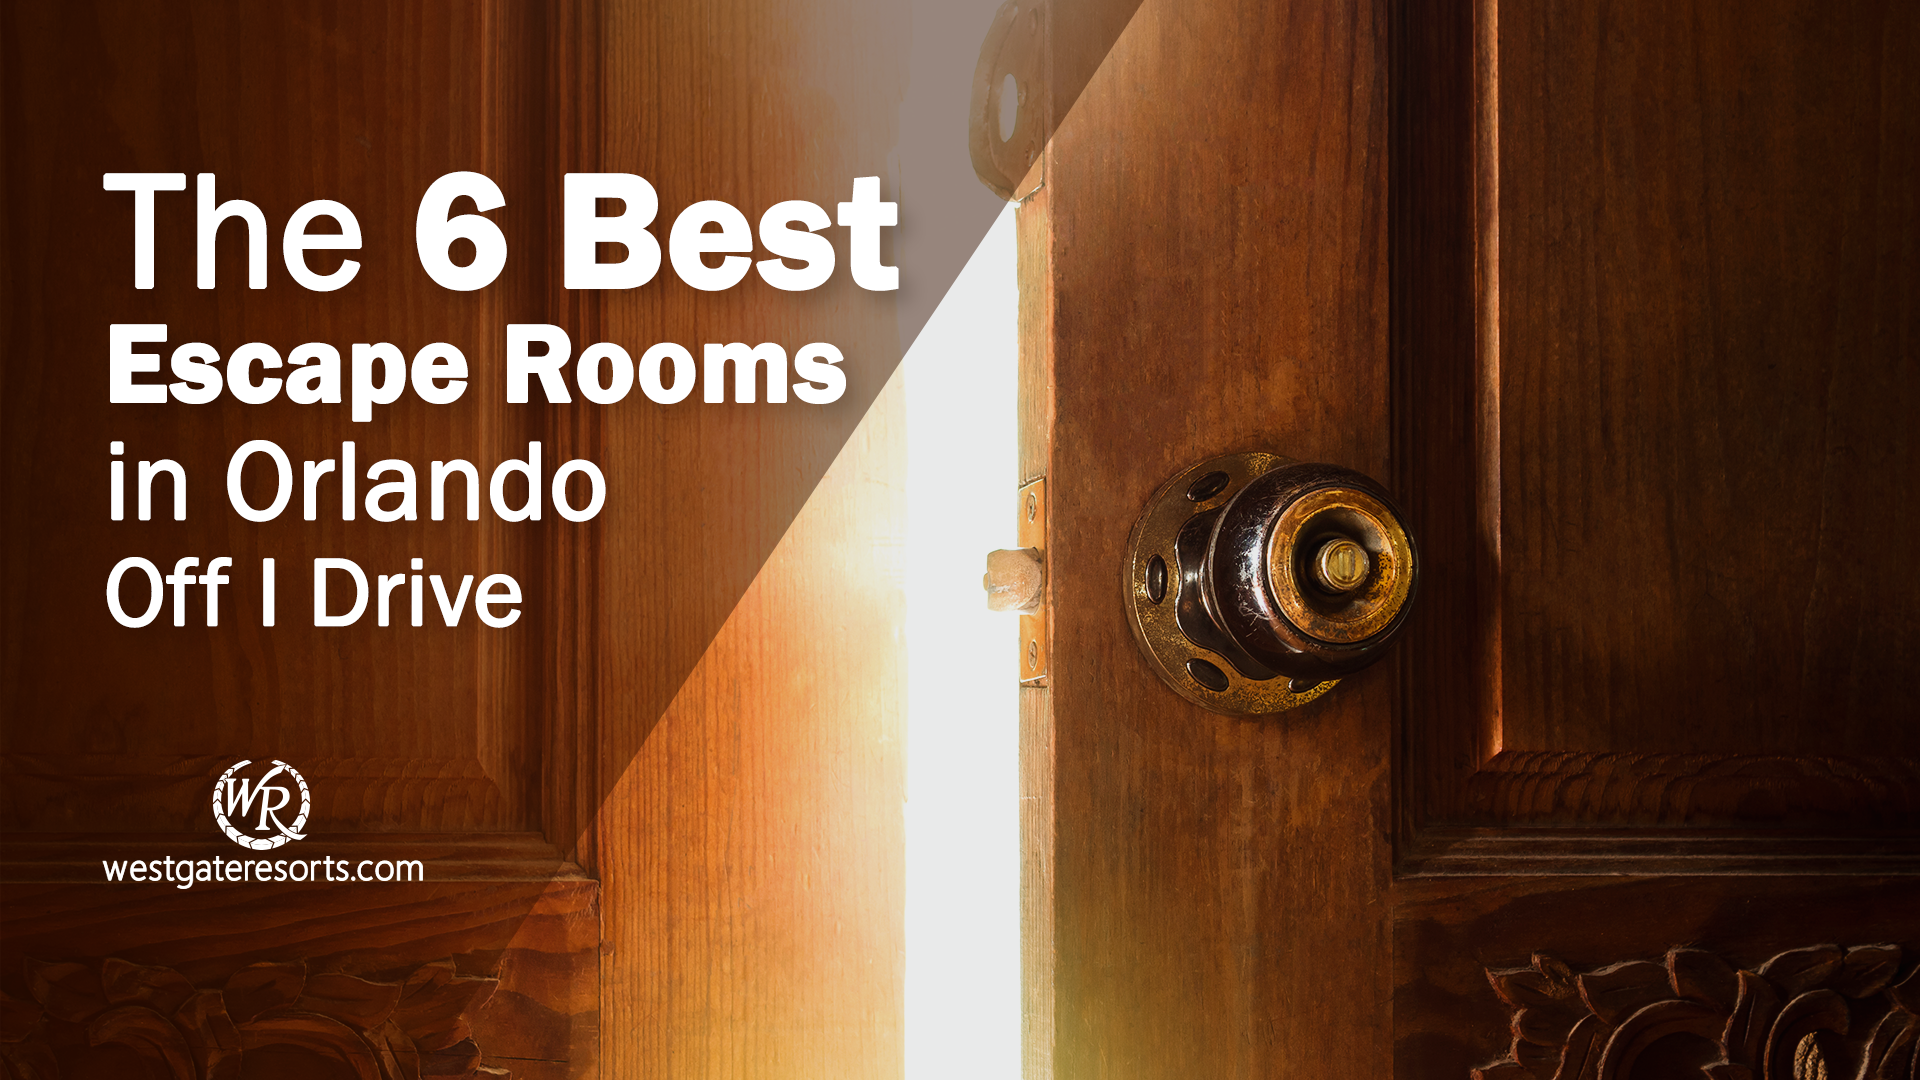 The 6 Best Escape Rooms in Orlando Off I Drive | Escape Rooms Orlando, FL | Westgate Resorts Orlando